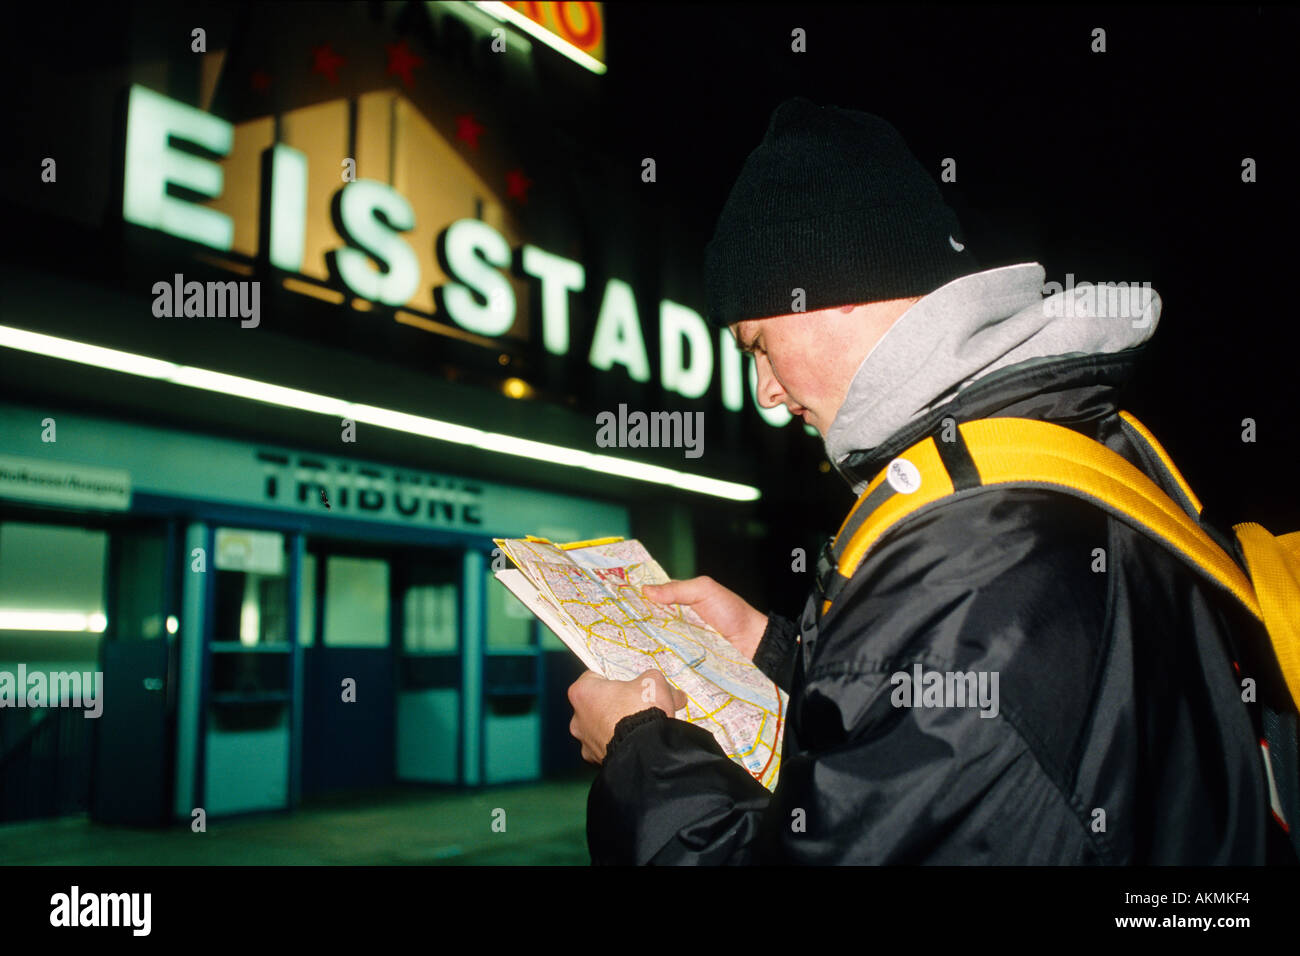 Germany Free time A young man in front of an ice stadium he is looking at a map  Stock Photo